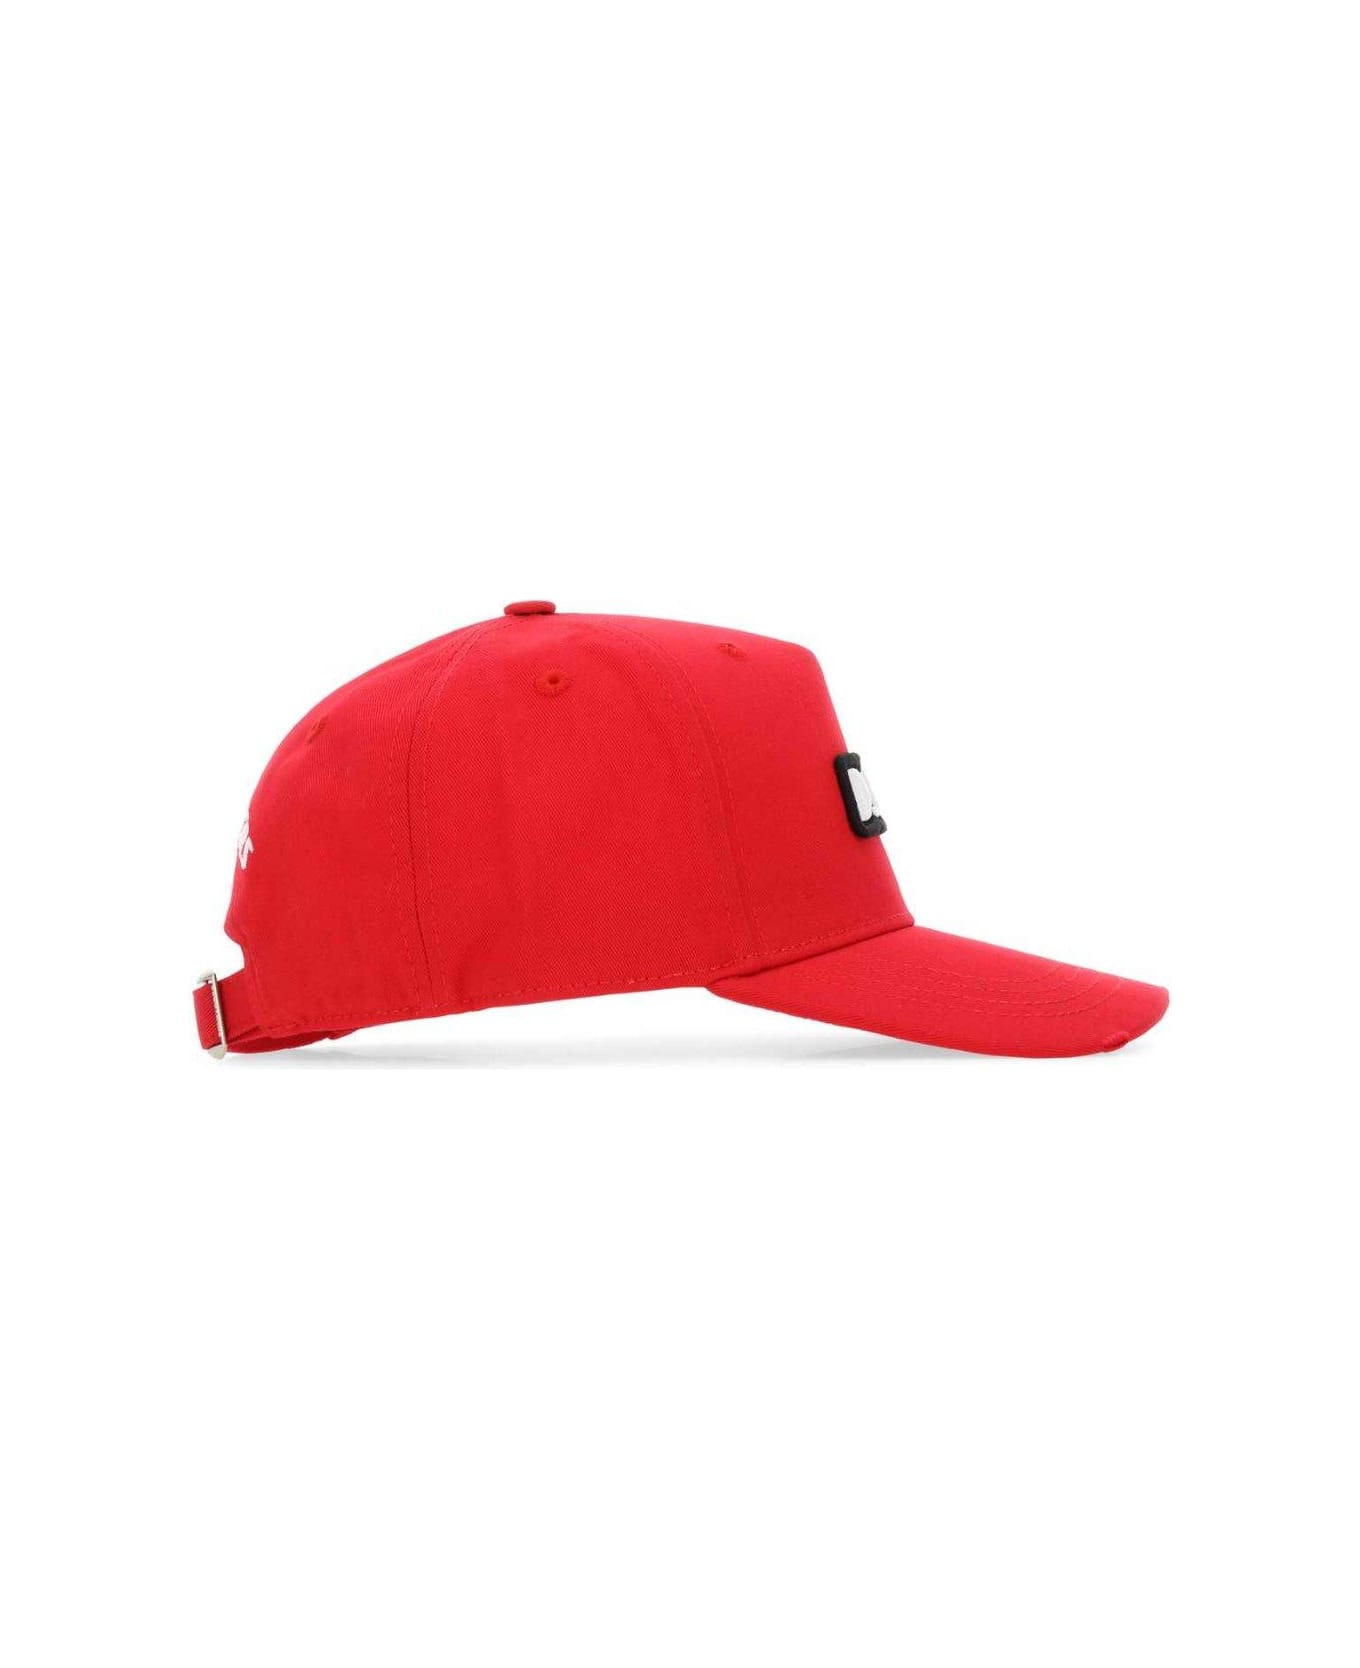 Dsquared2 Logo-embroidered Baseball Cap - Red